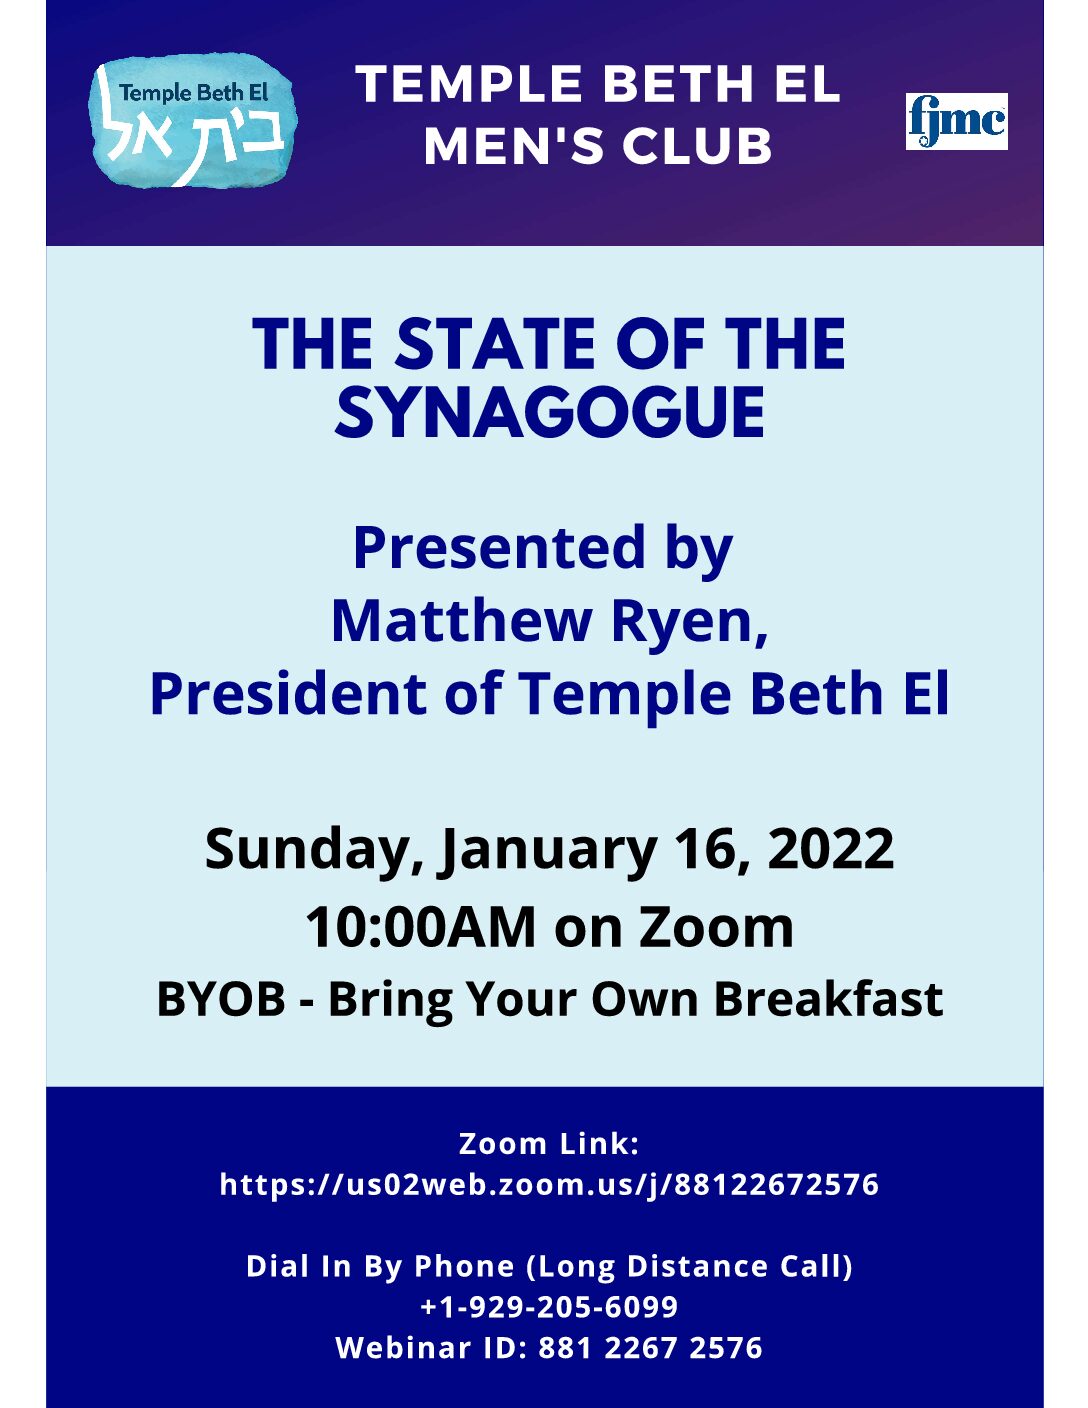 Mens Club Breakfast Program: The State of the Synagogue